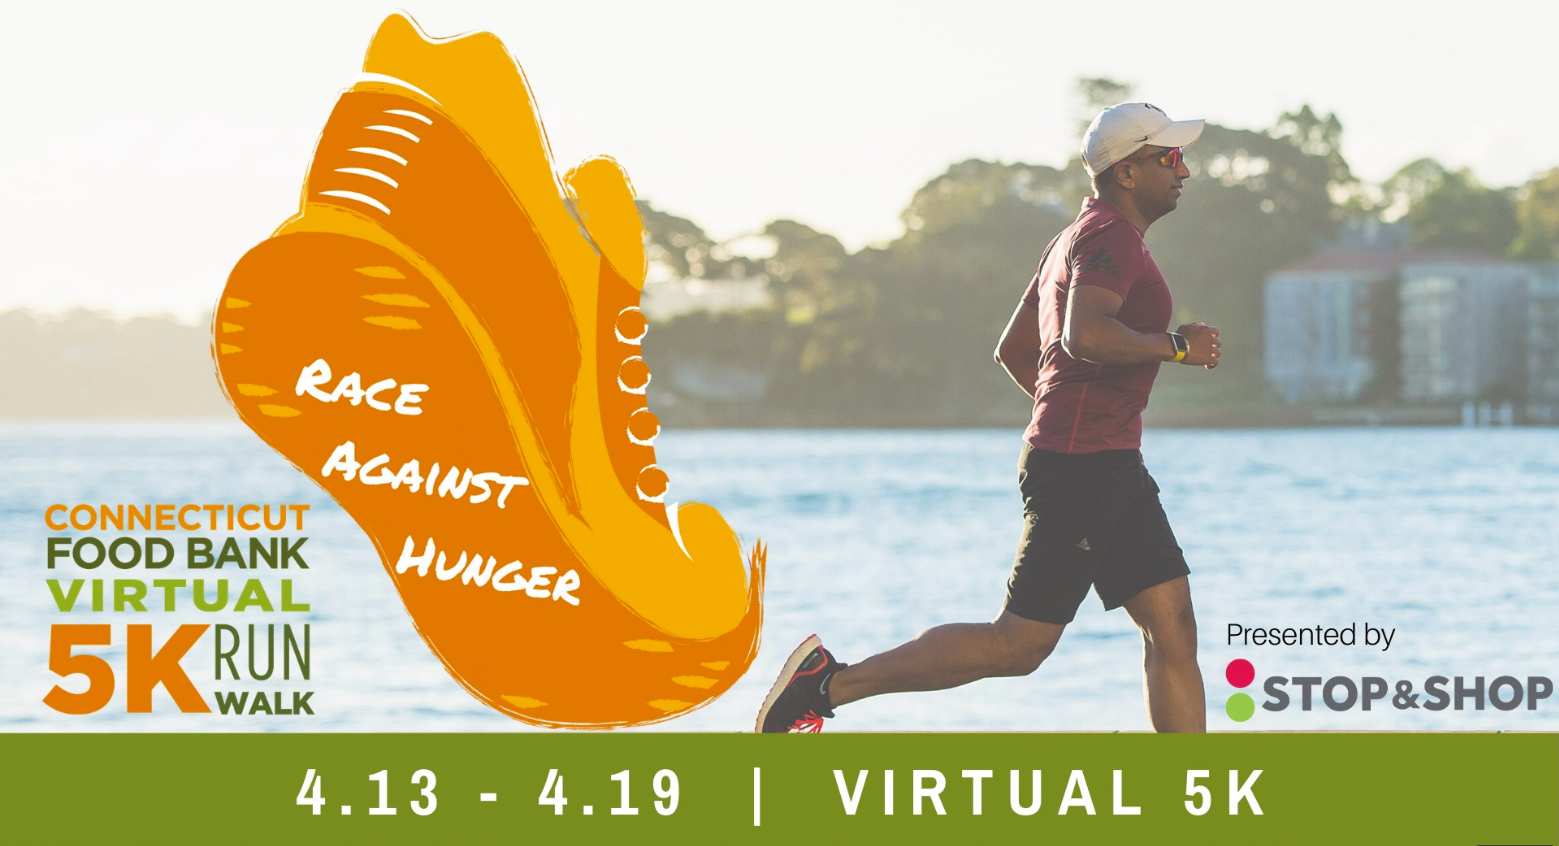 FCBuzz Residents Can Support Connecticut Food Bank By Participating in Race Against Hunger